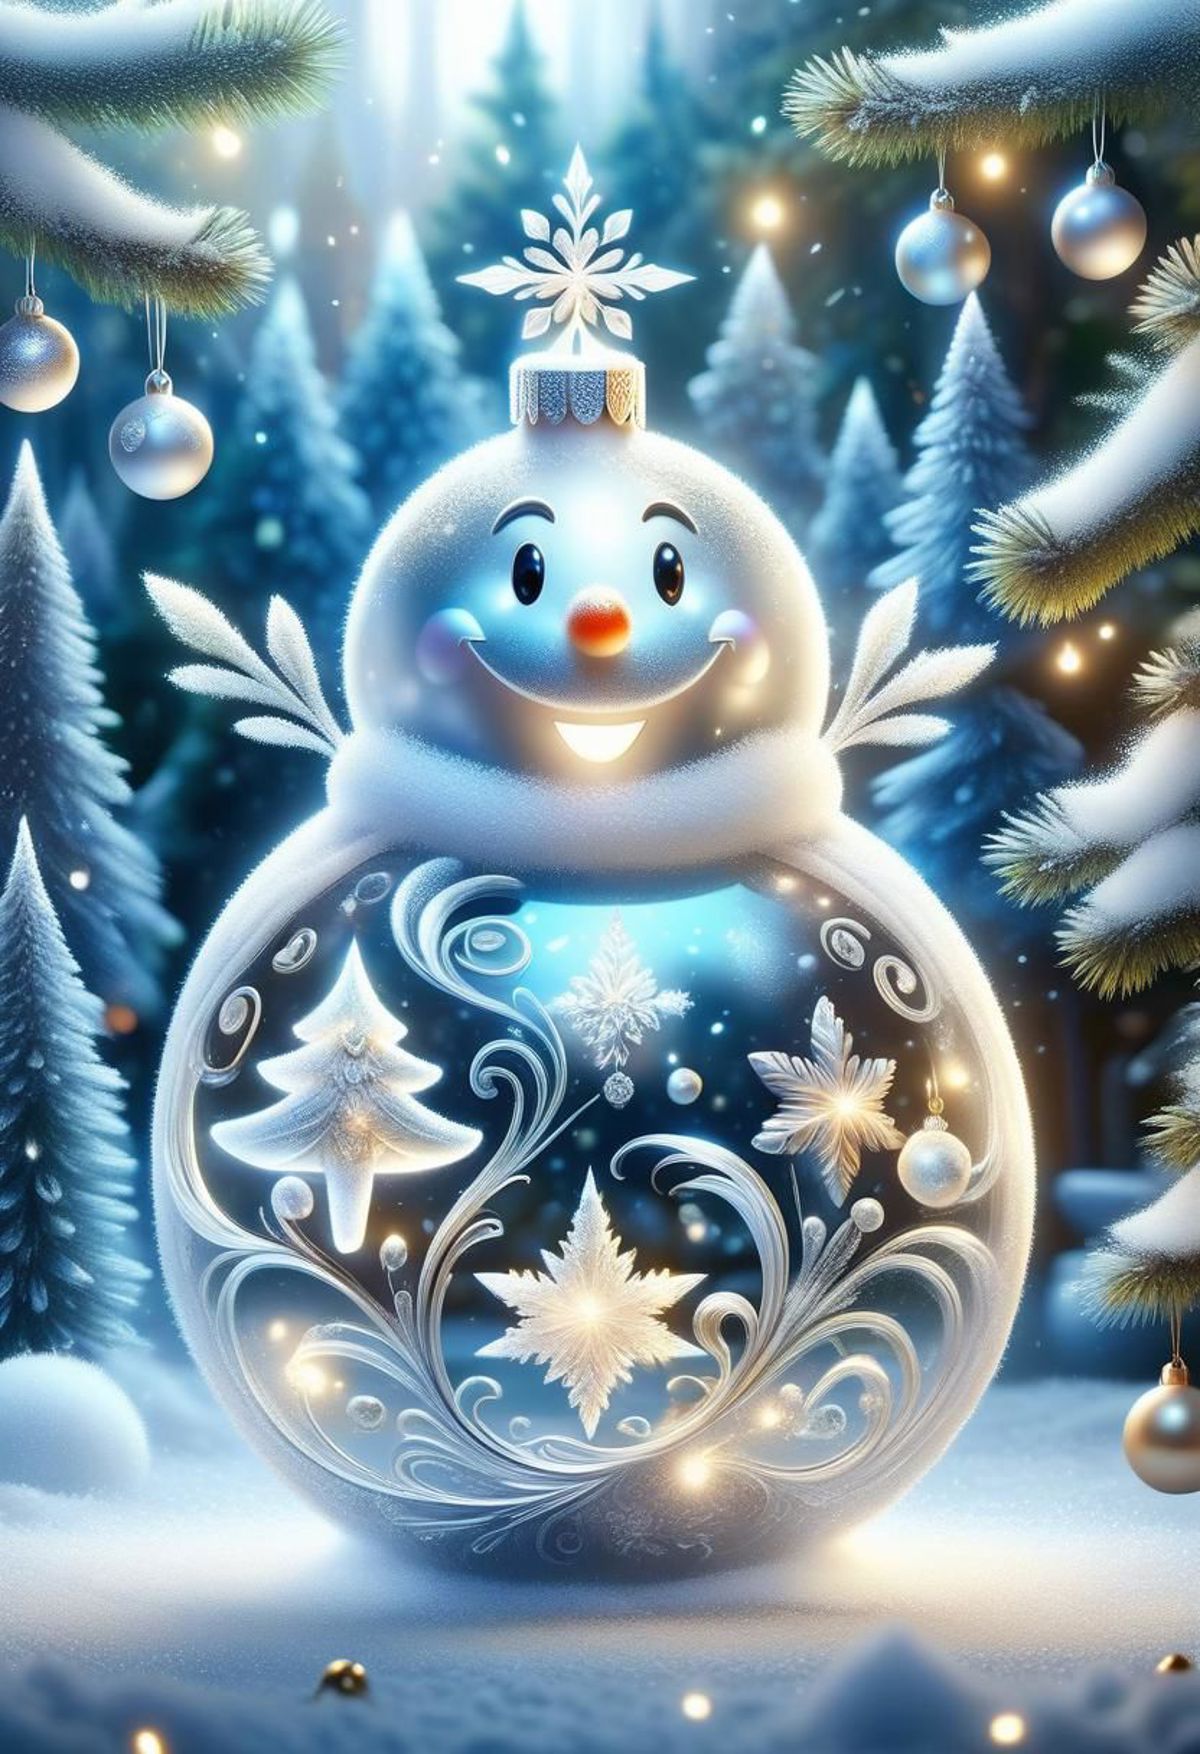 An ornate blue and white Christmas ornament featuring a snowman smiling.